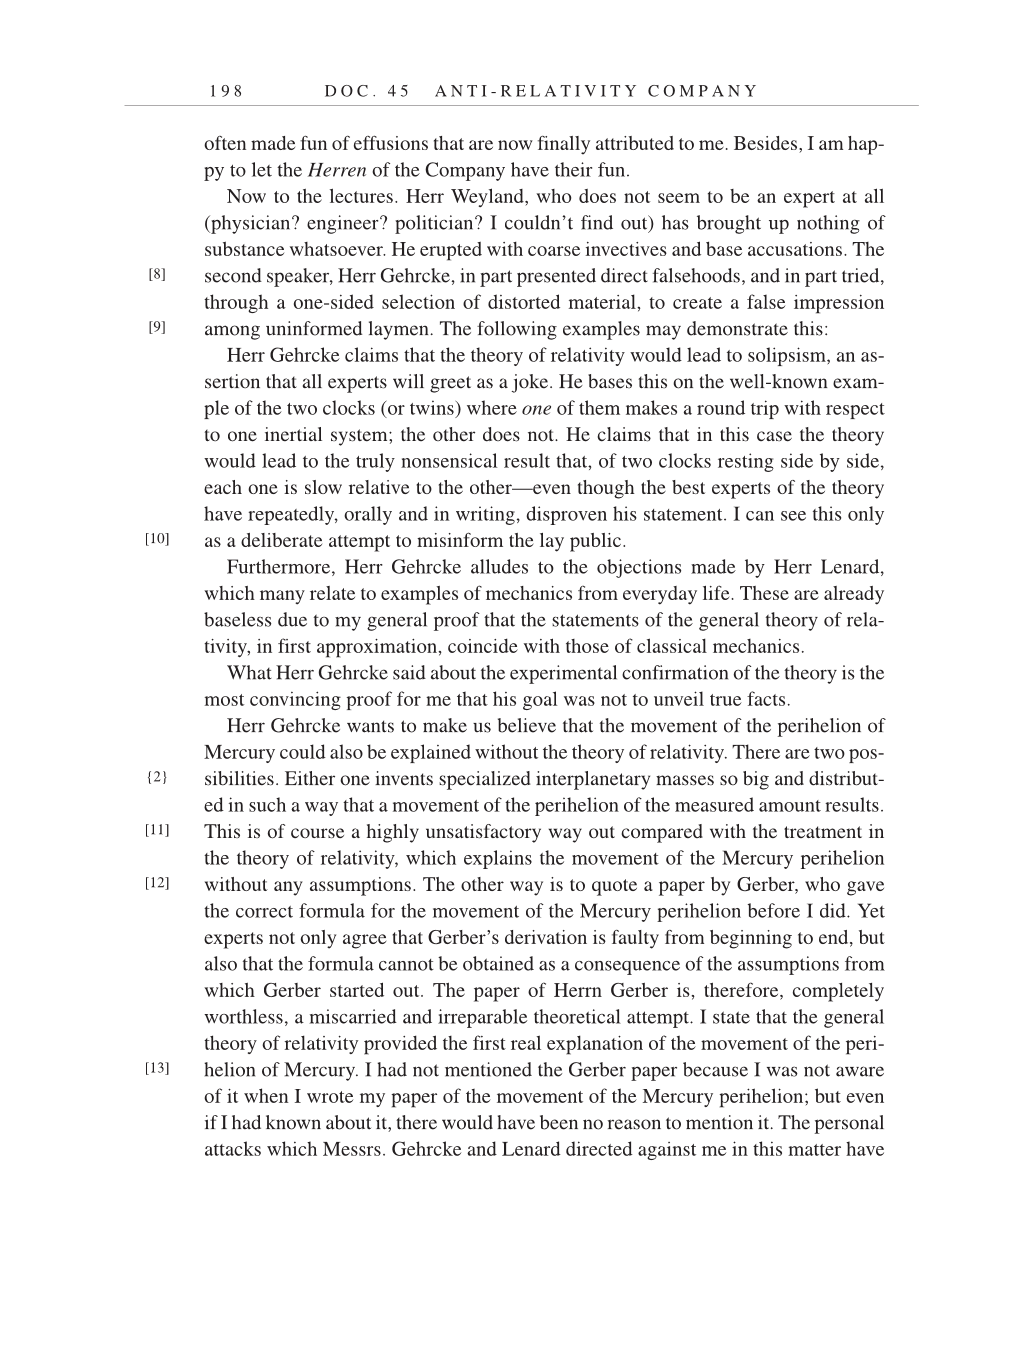 Volume 7: The Berlin Years: Writings, 1918-1921 (English translation supplement) page 198